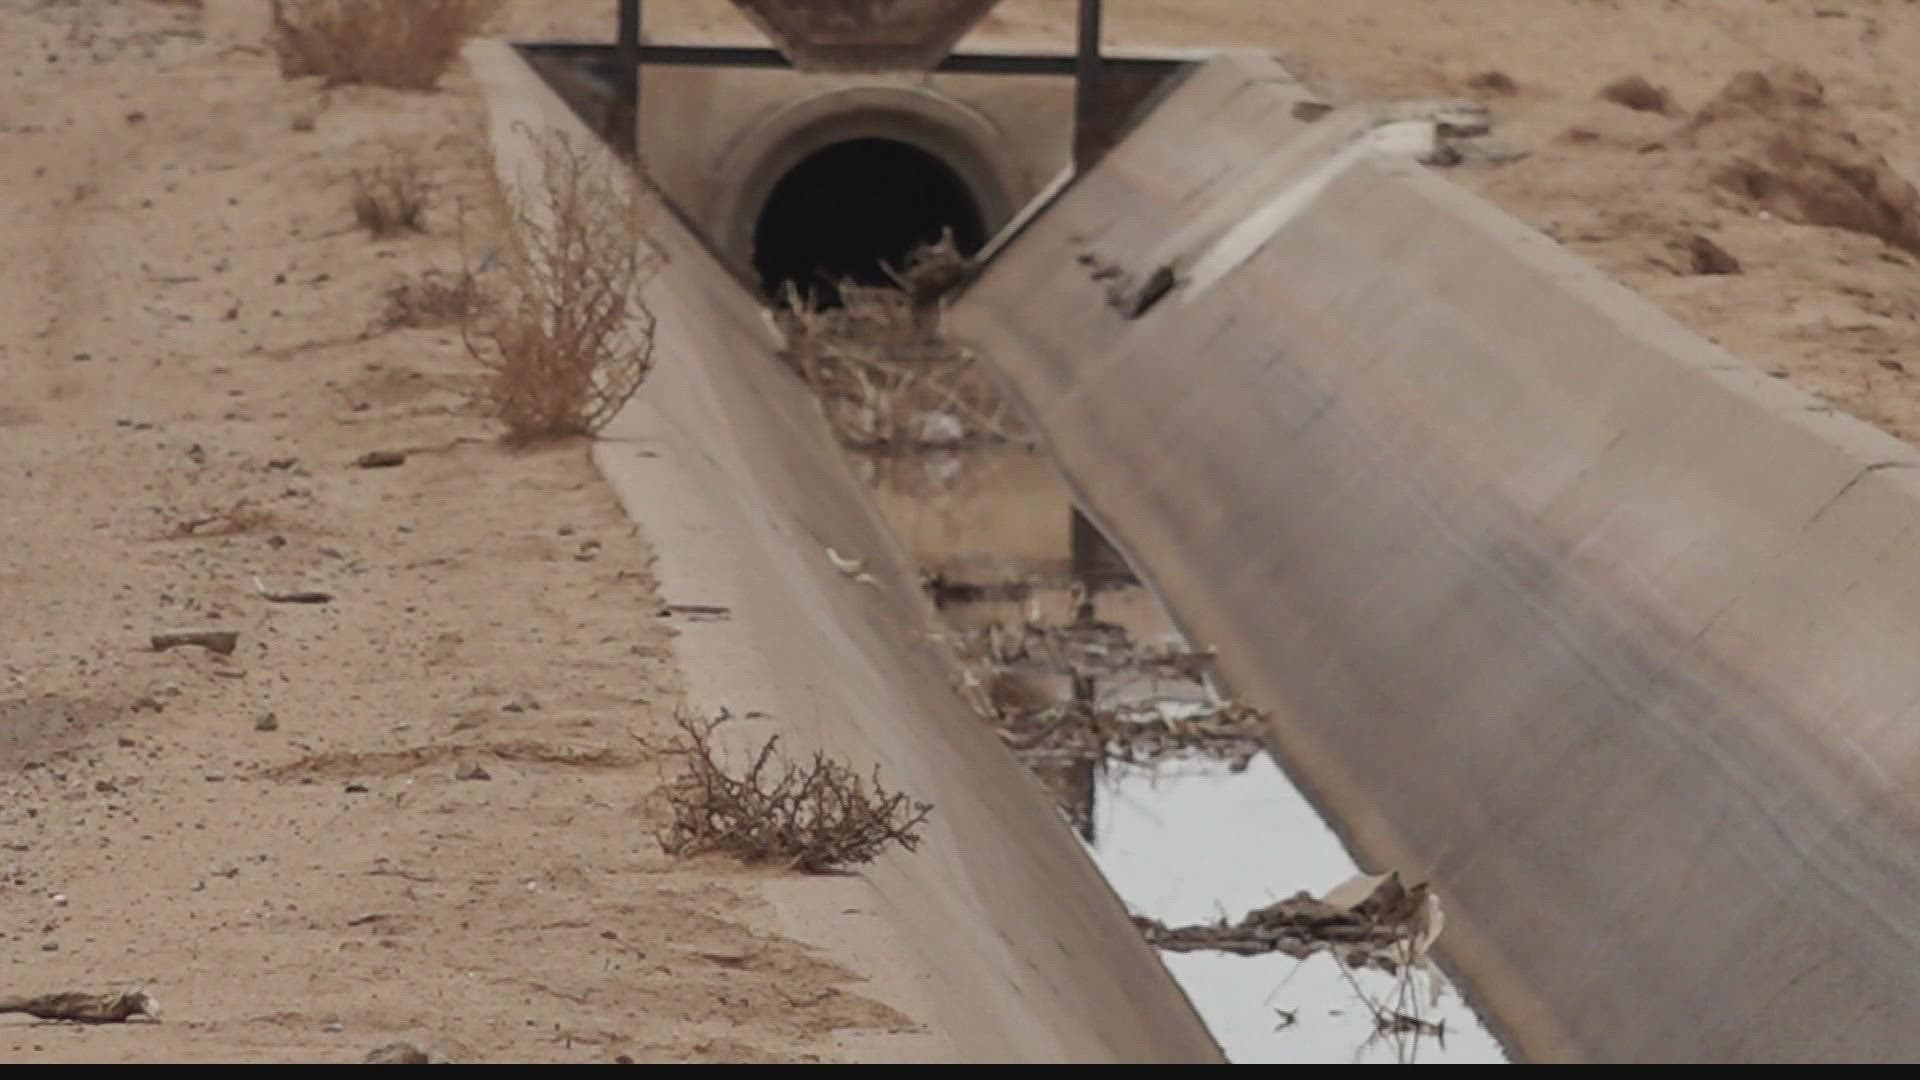 The city of Phoenix is launching the first stage of its drought preparedness plan in order to conserve more water as drought conditions worsen on the Colorado River.